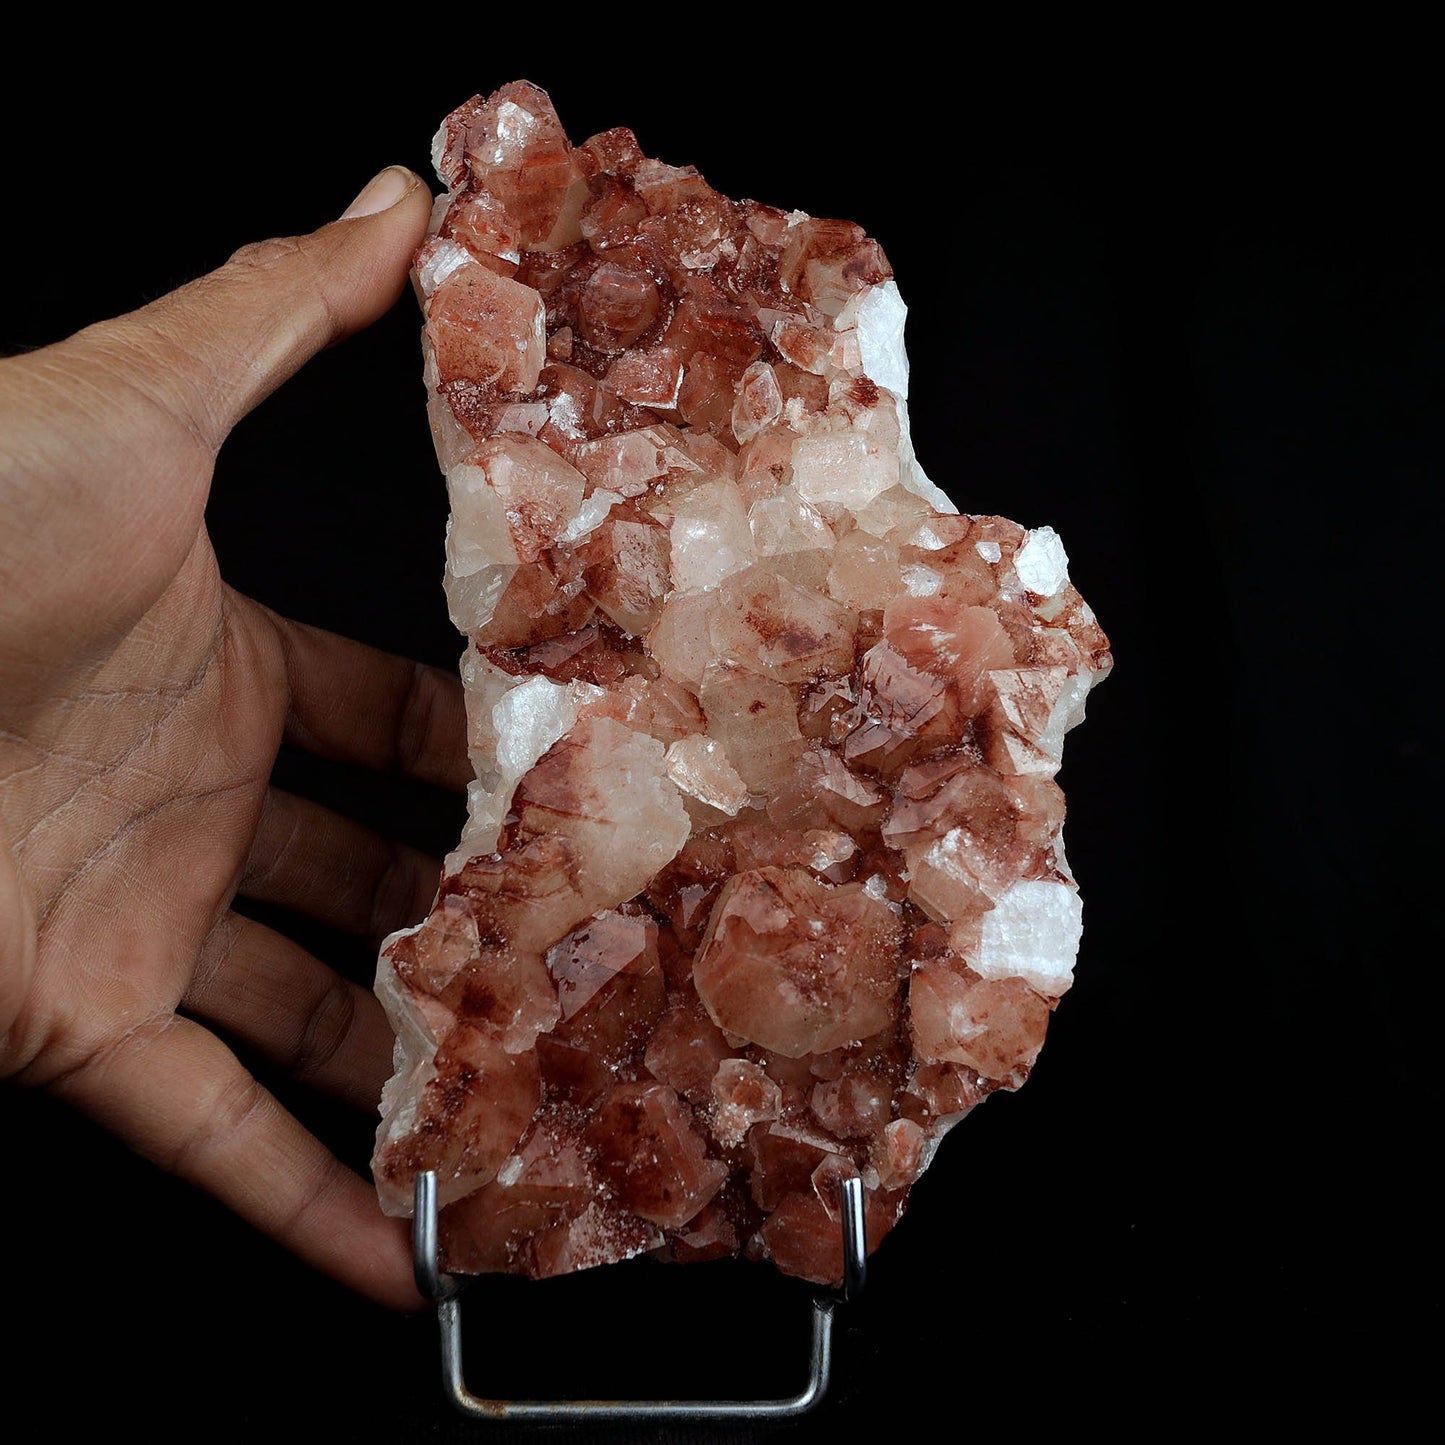 Apophyllite red cluster Natural Mineral Specimen # B 3715  https://www.superbminerals.us/products/apophyllite-red-cluster-natural-mineral-specimen-b-3715  Features:A lovely little Apophyllite Hematite Cluster makes it red apophyllite.&nbsp; This specimen is in top condition and makes for a very aesthetic and compact display piece.&nbsp; Several crystal shapes appear on the cluster and this is a more unusual form of the mineral, with the hematite inclusions in the Apophy